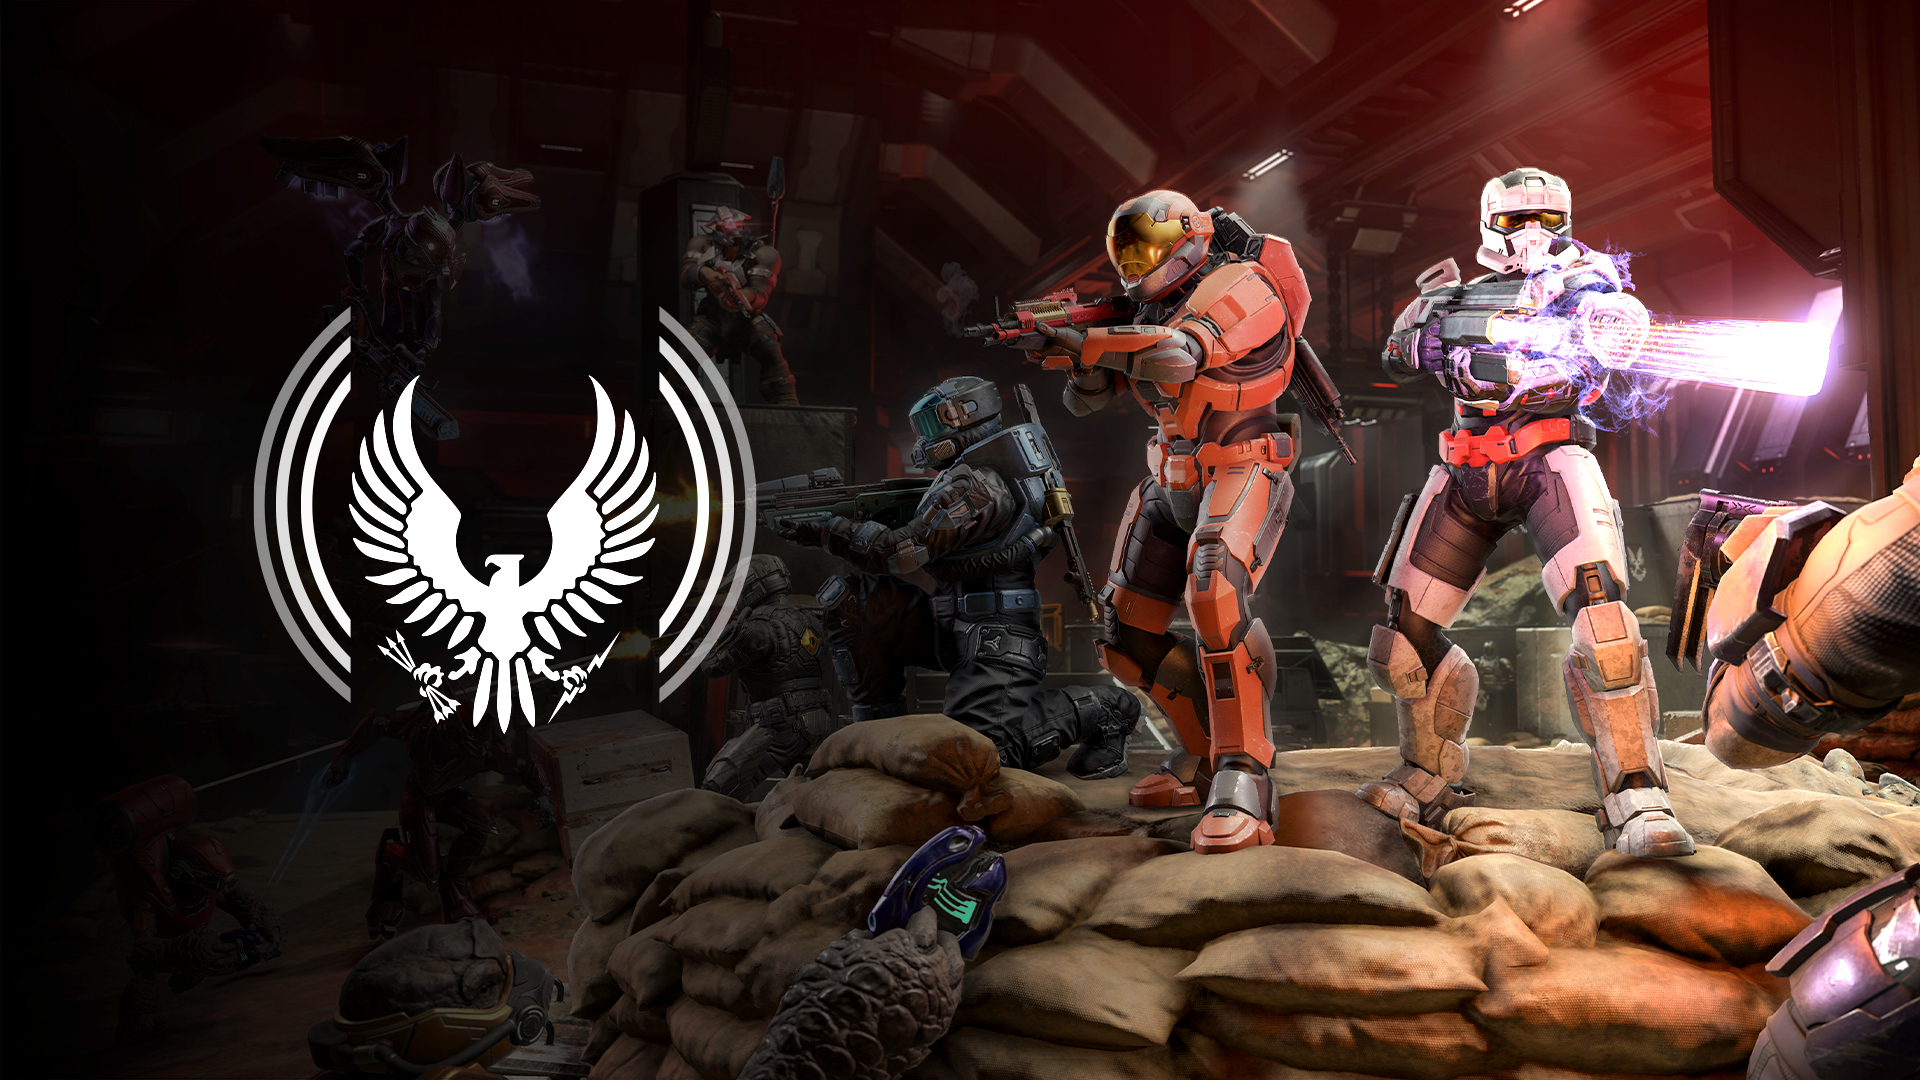 Halo Infinite playlist image for Firefight: King of the Hill on Heroic difficulty depicting Spartans fighting Banished on the House of Reckoning map